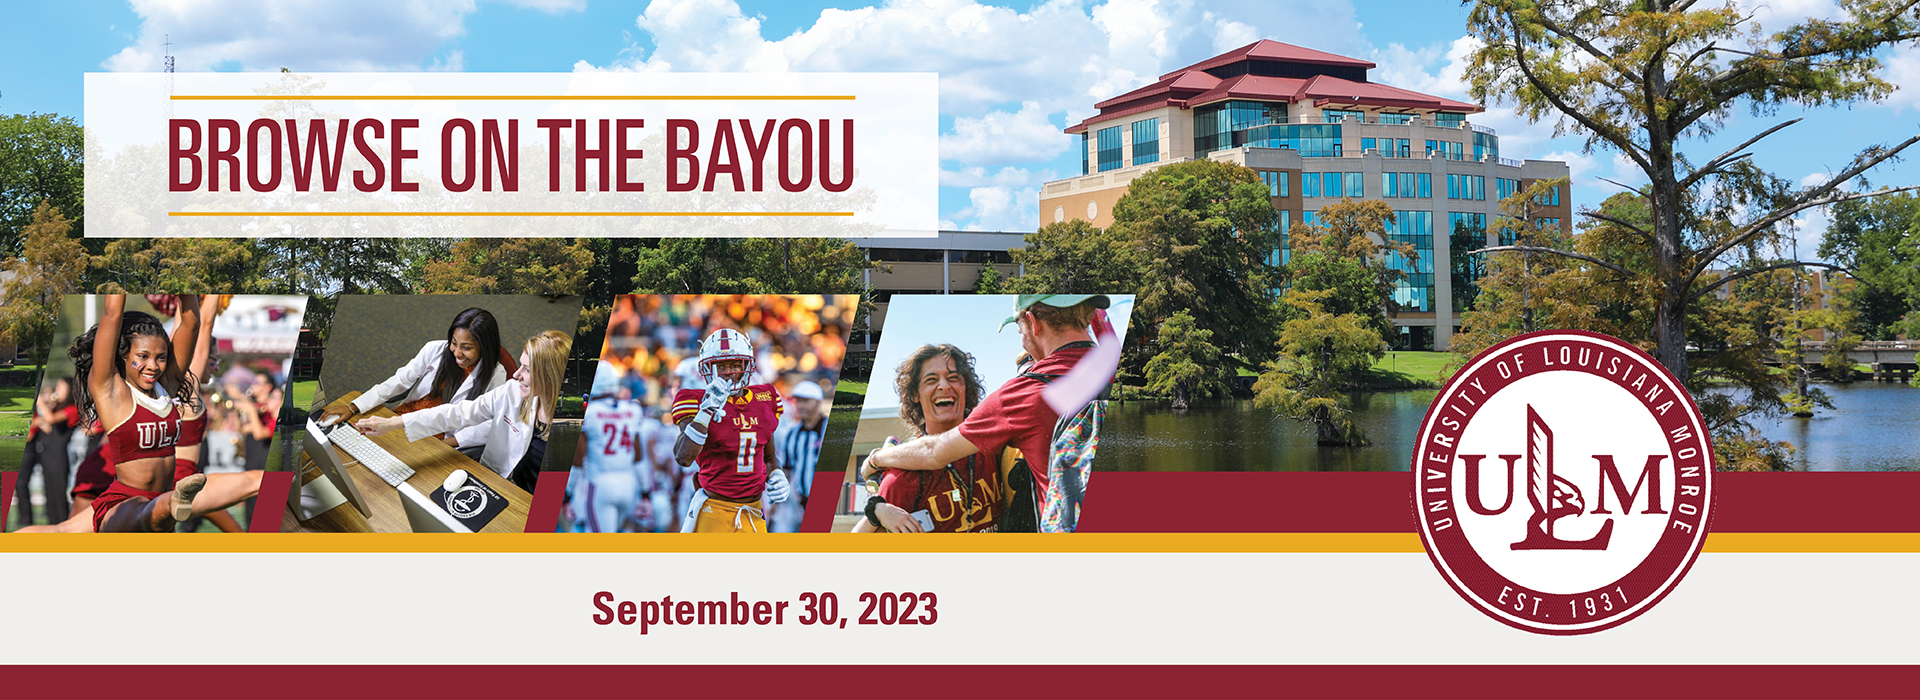 ULM Browse on the Bayou - Fall 2023 banner